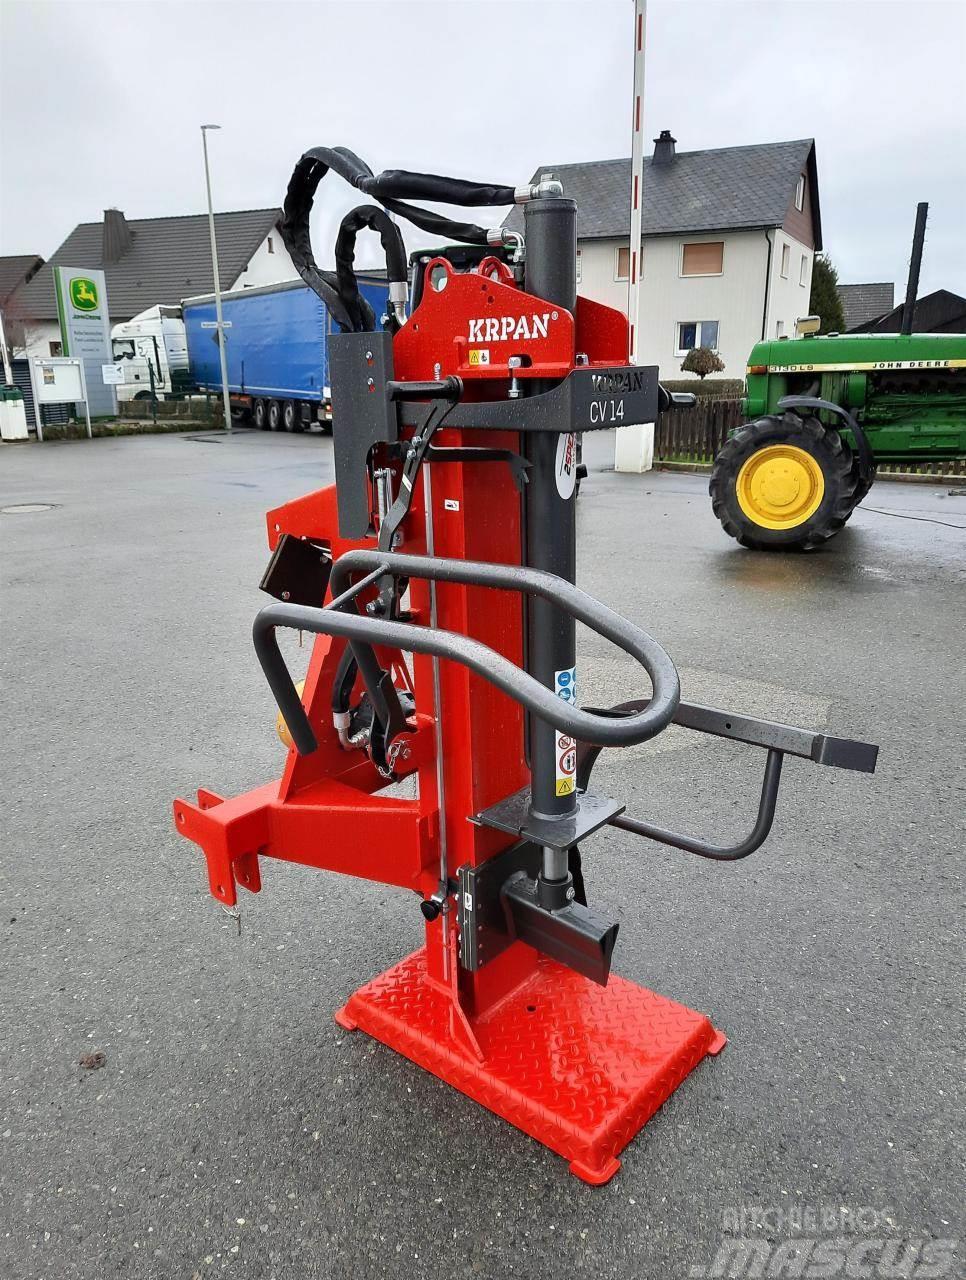 Krpan CV14K pro Wood splitters, cutters, and chippers